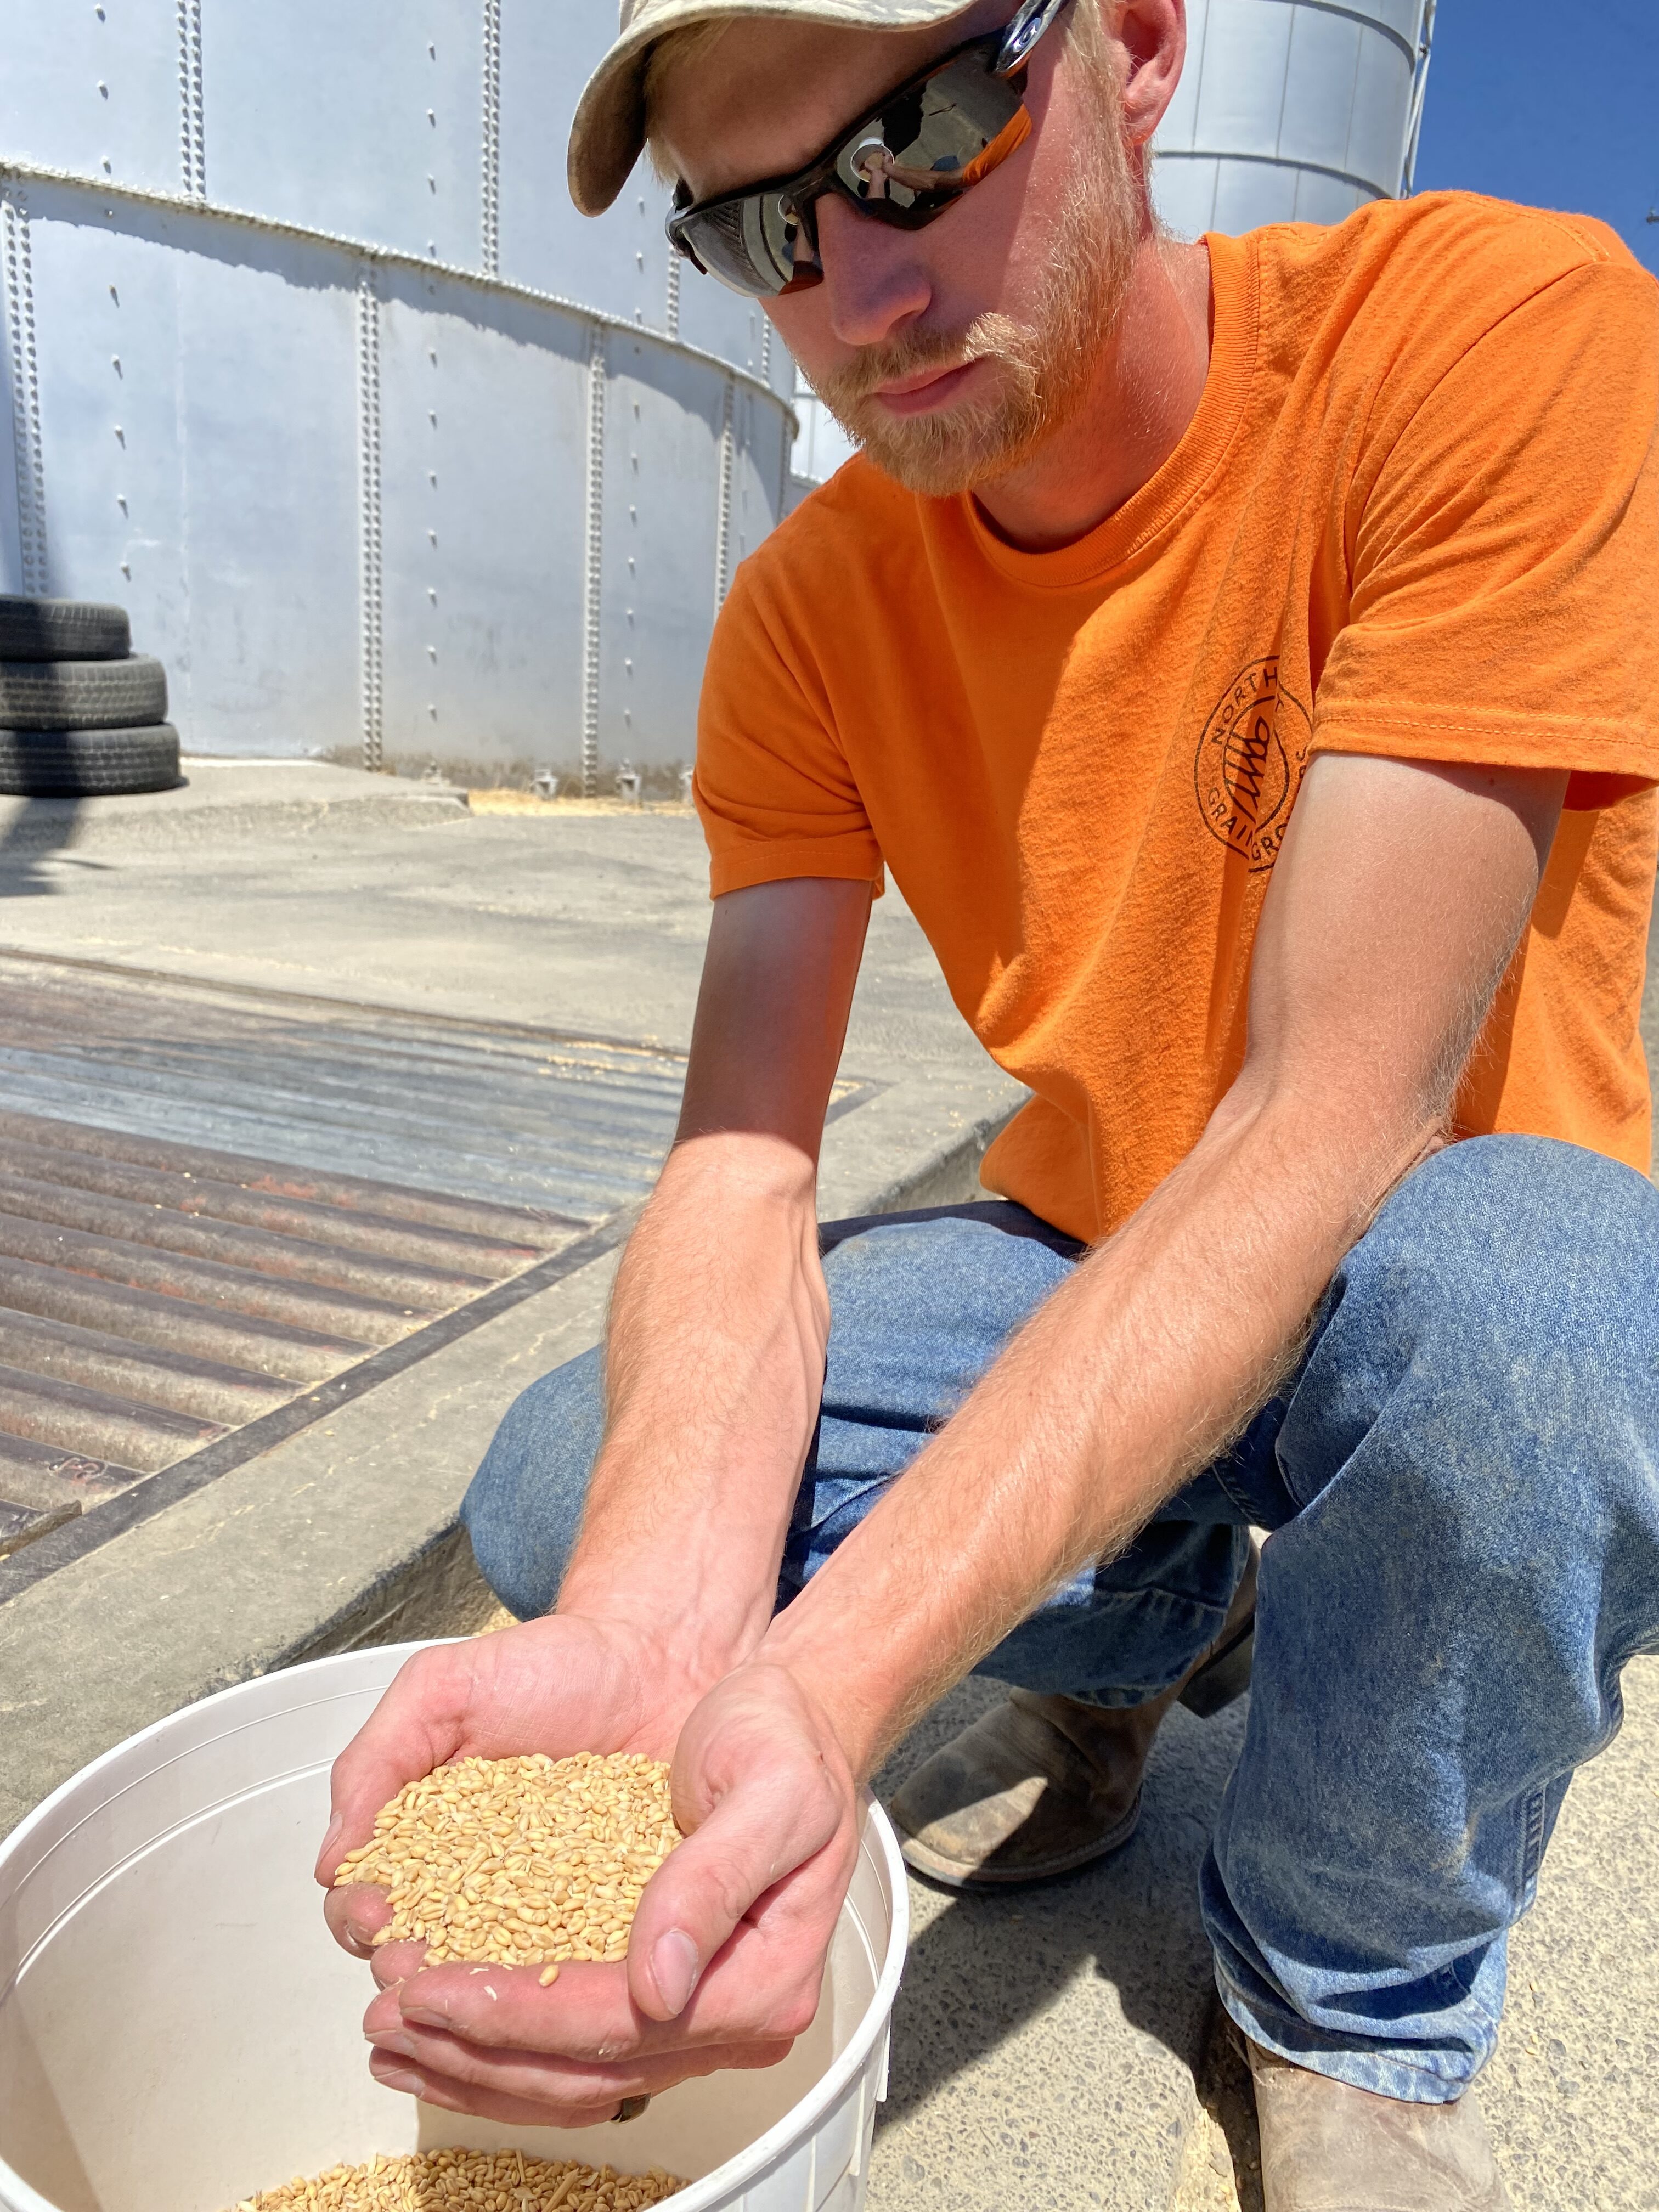 Tony Emineth cradles the last bit of a freshly-dumped-out load of grain in hand at the Northwest Grain Growers in Walla Walla (Credit: Anna King / Northwest News Network)